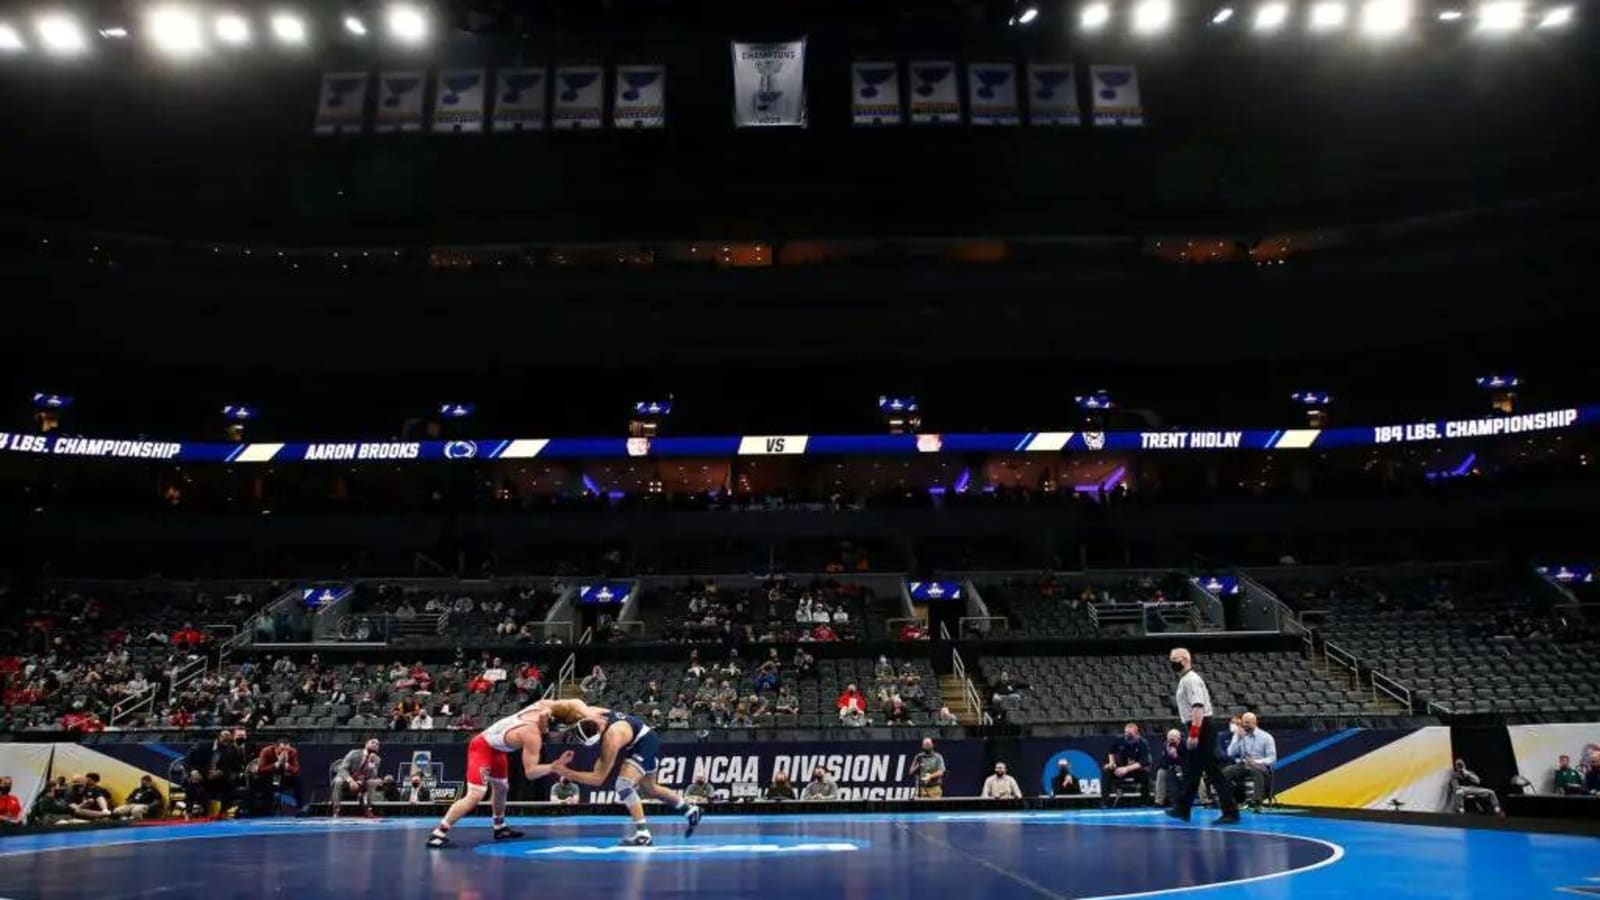 Penn State Wrestling Star Sounds Off on Mitchell Messenbrink Olympic Trials Cheap Shot